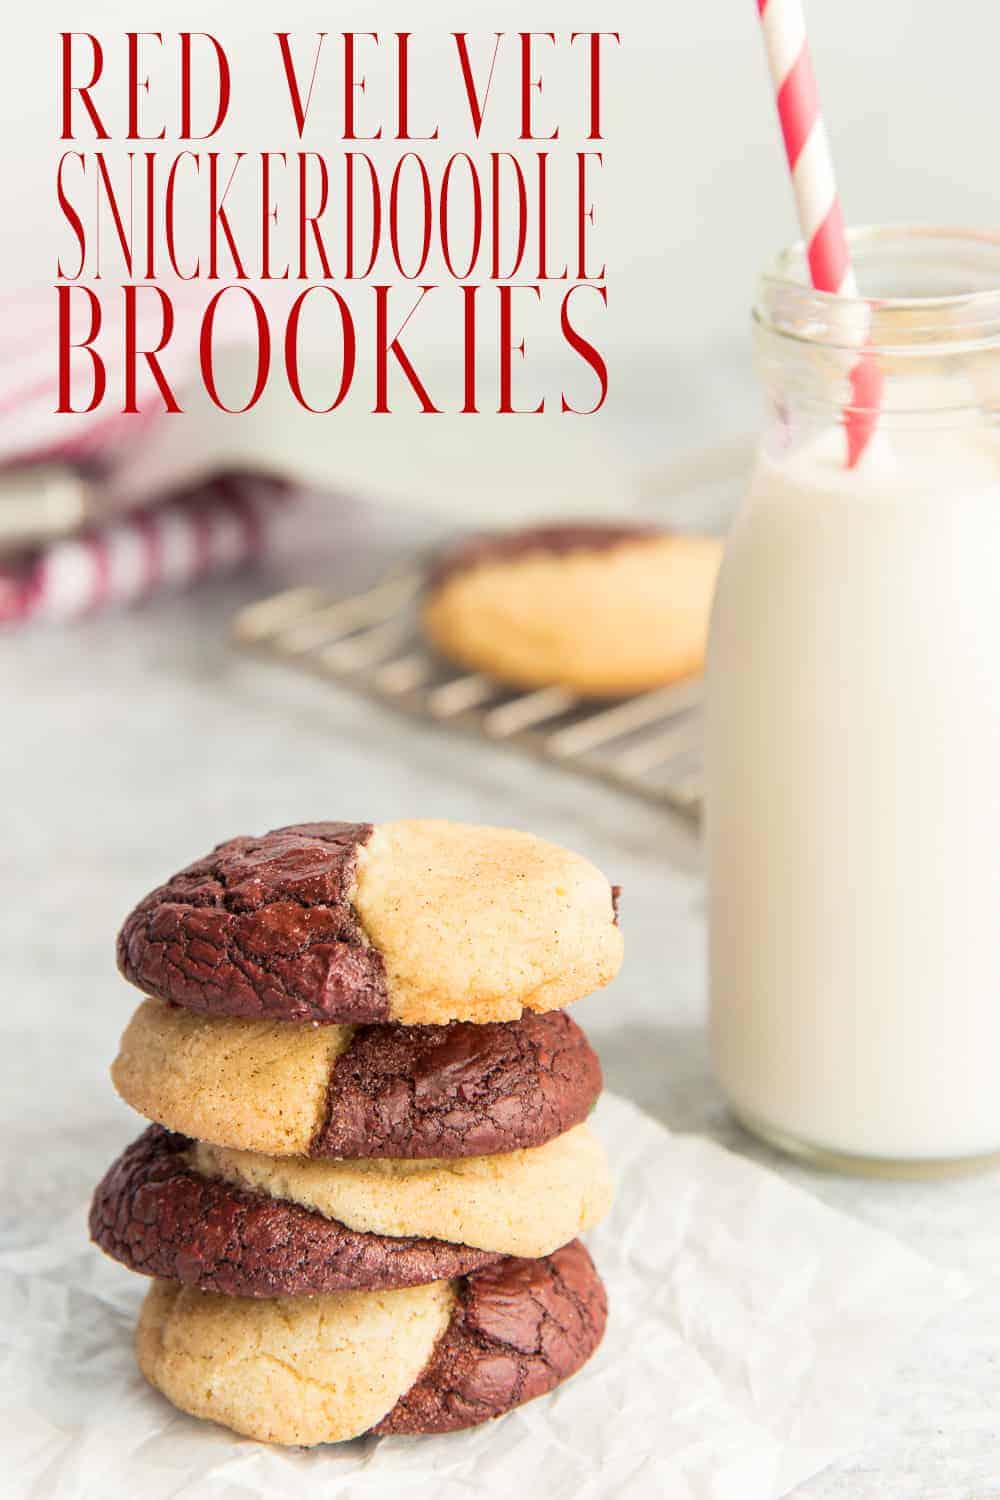 Red Velvet Snickerdoodle Brookies combine the best of both dessert cookie worlds. Decadent, rich red velvet brownie collides with a buttery spiced snickerdoodle cookie to make the sweetest bite ever. #cookie #brookie #crownie #chocolate #redvelvet #snickerdoodle #valentinesdaycookie #dessert #dessertrecipe #cookierecipe via @ediblesense